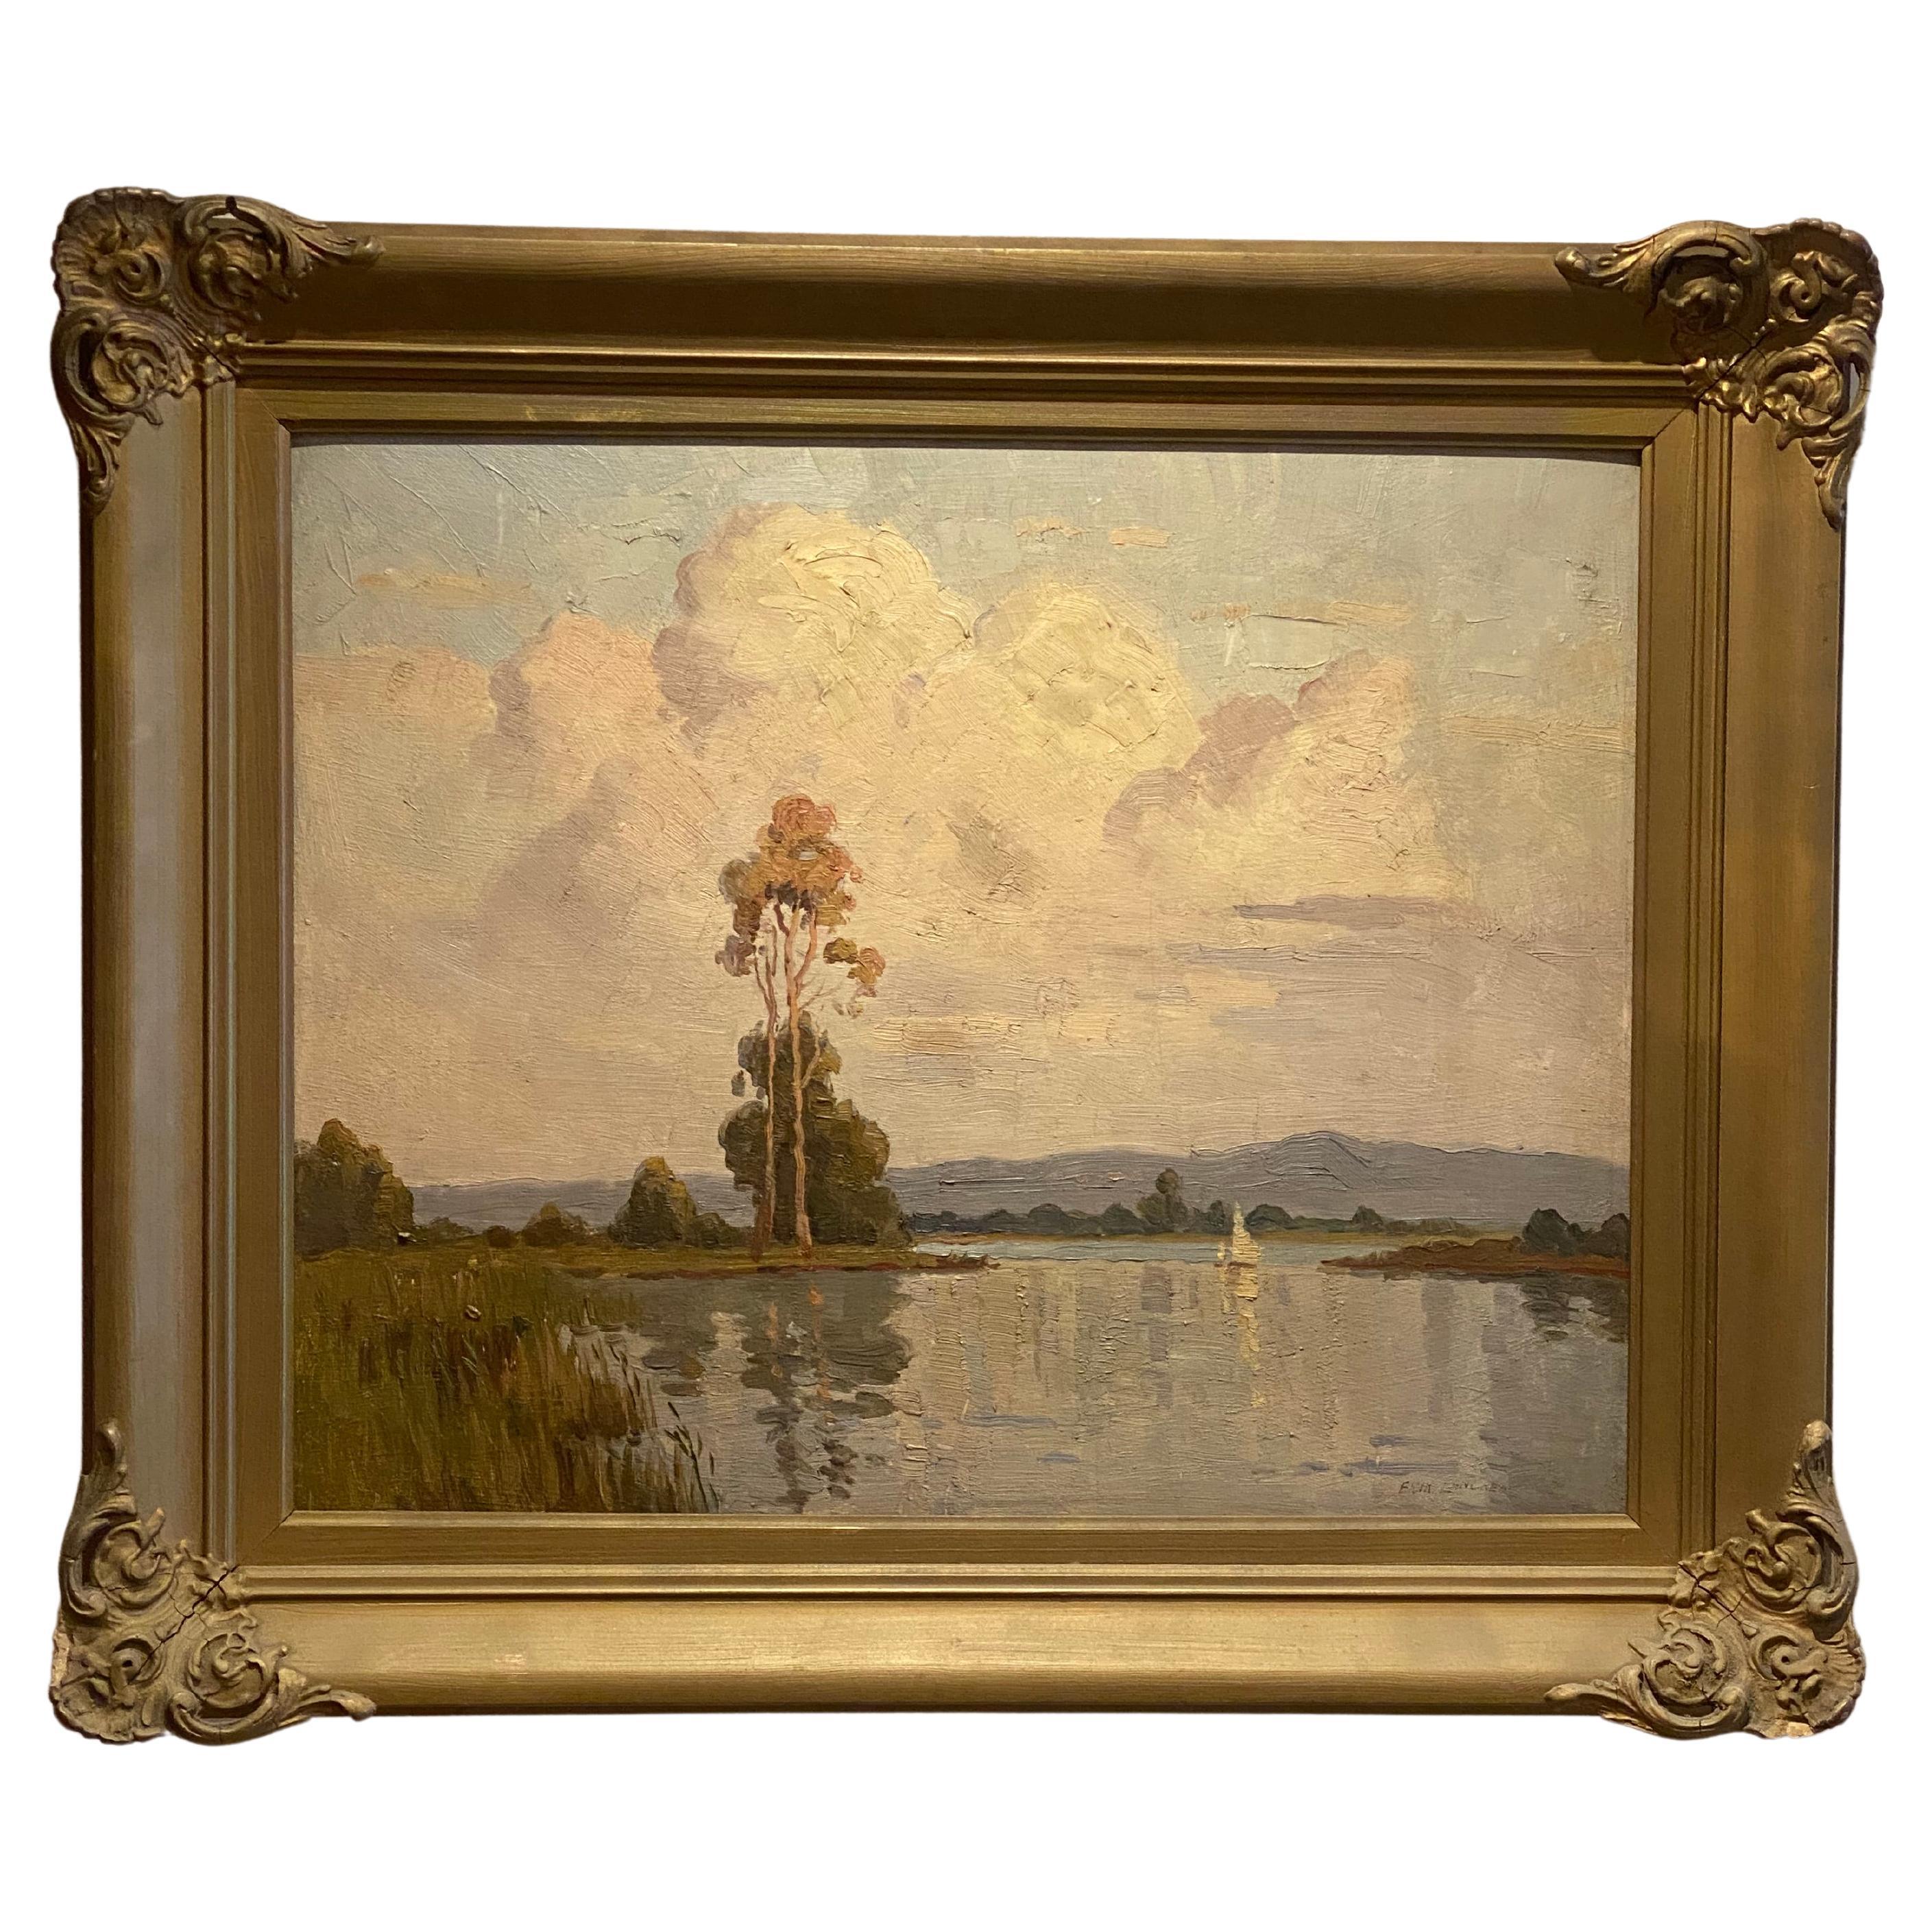 Painting River Lake by Erik Langker. Oil on board. Measurements: 63cm x 53cm. For Sale